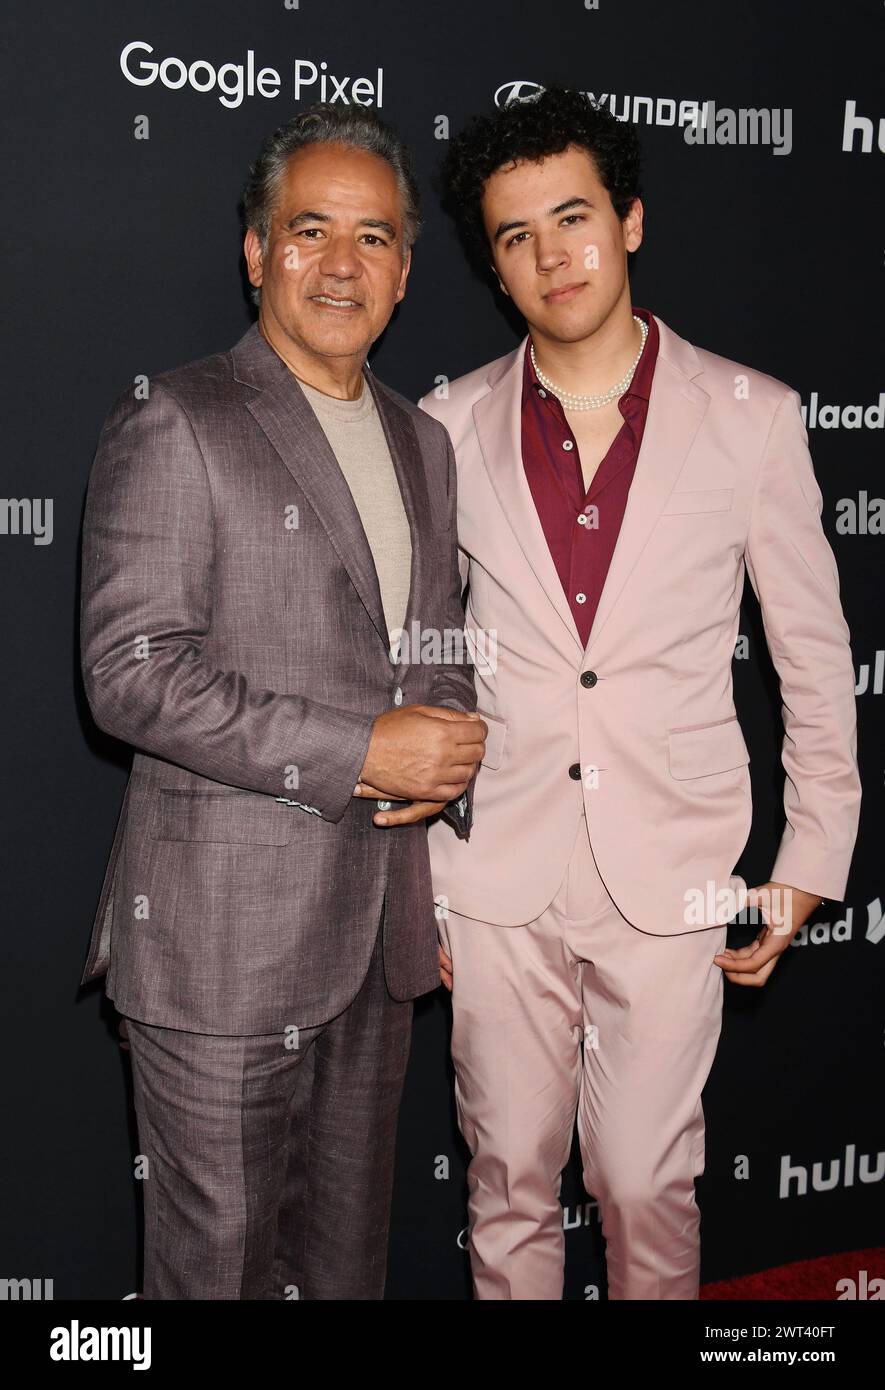 BEVERLY HILLS, CALIFORNIA - MARCH 14: (L-R) John Ortiz and Clemente Ortiz attend the 35th Annual GLAAD Media Awards at The Beverly Hilton Hotel on Mar Stock Photo